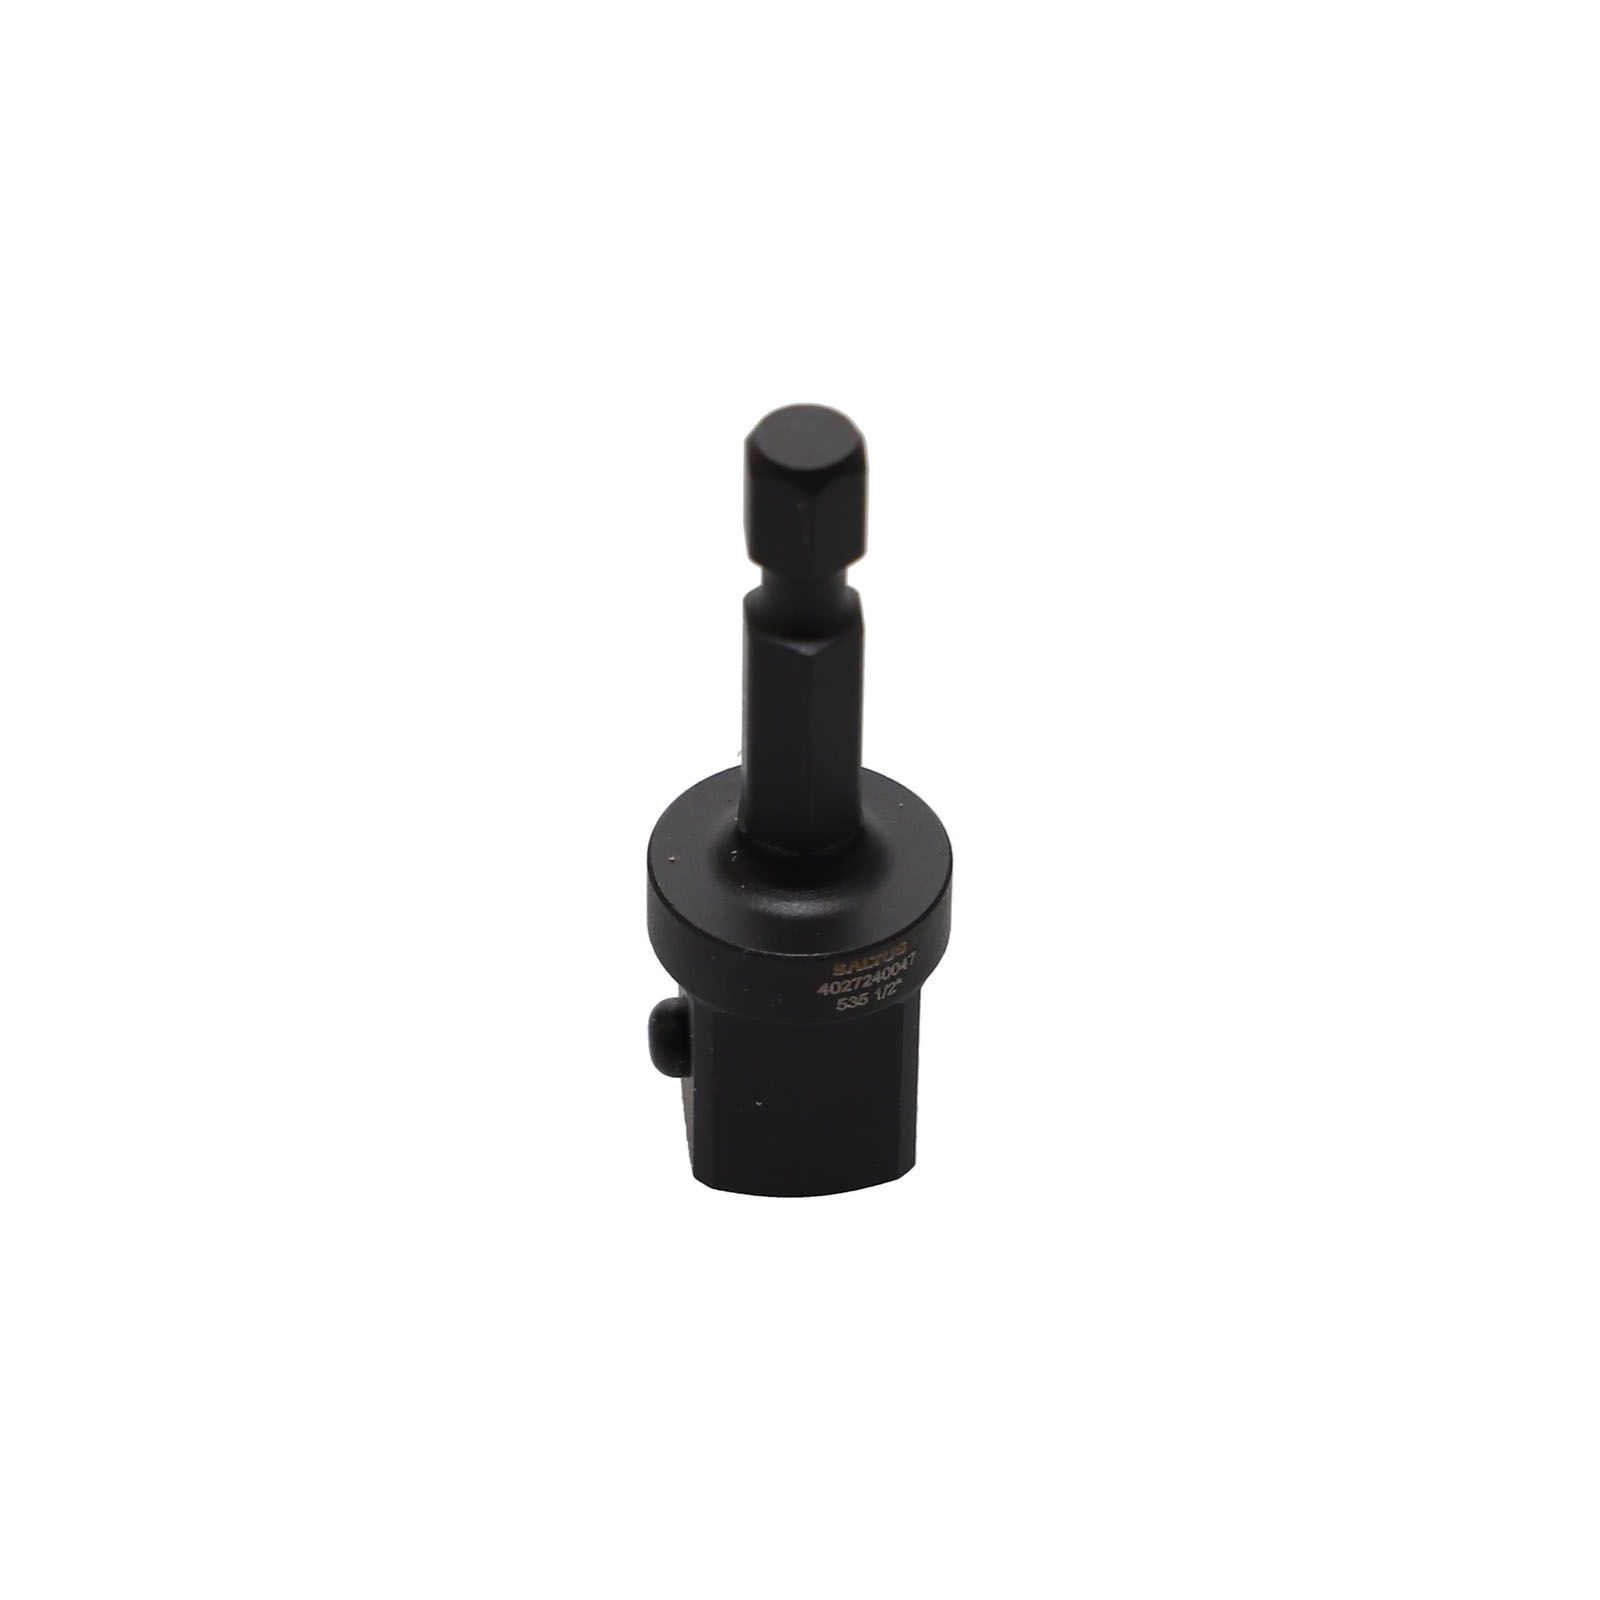 Adapter-HEXE1/4-L50-SQ1/2-P productfoto